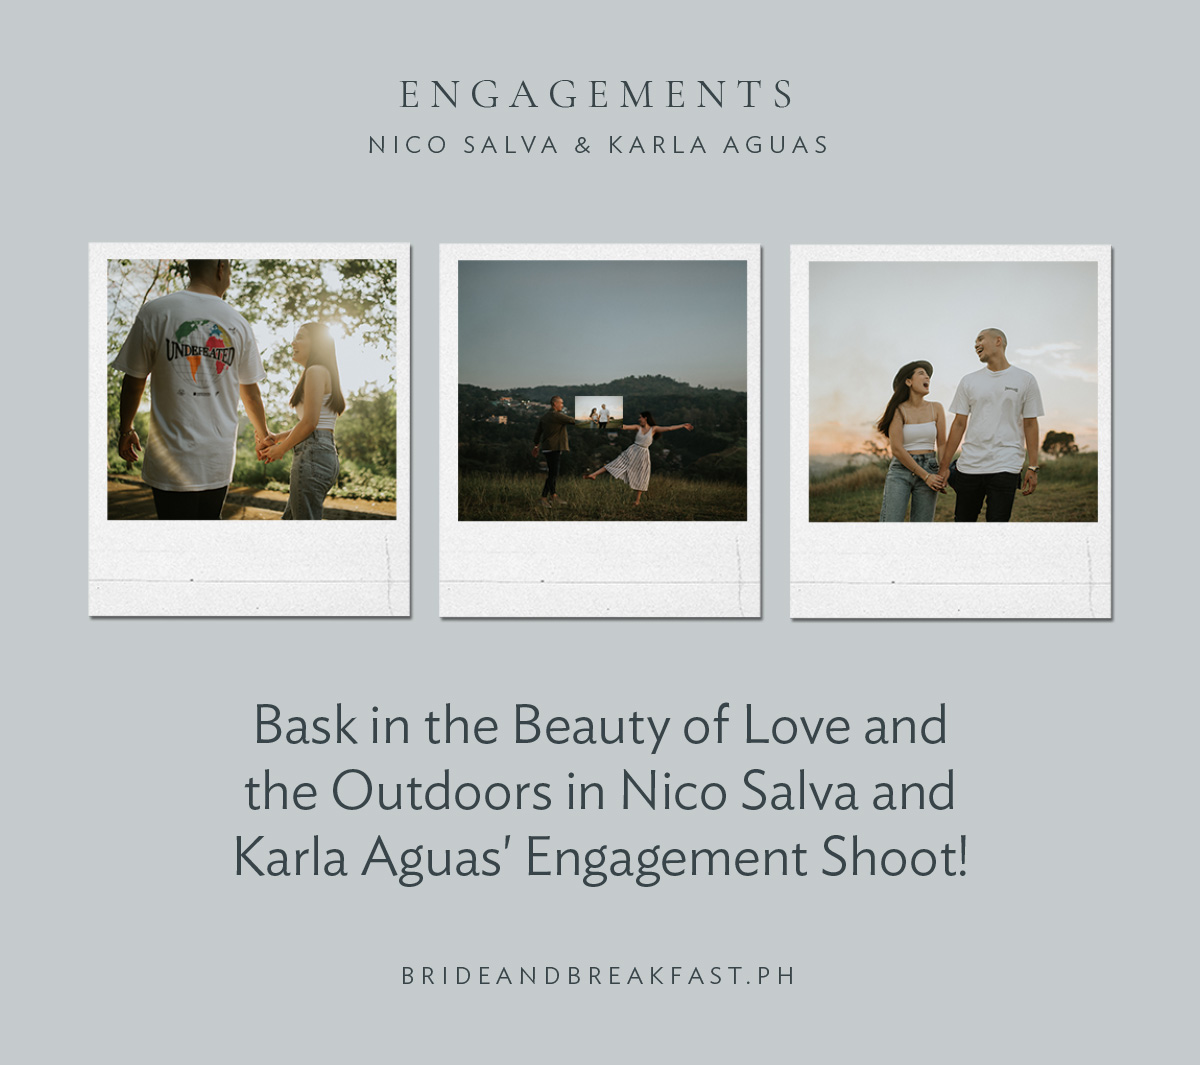 Bask in the Beauty of Love and the Outdoors in Nico Salva and Karla Aguas' Engagement Shoot!